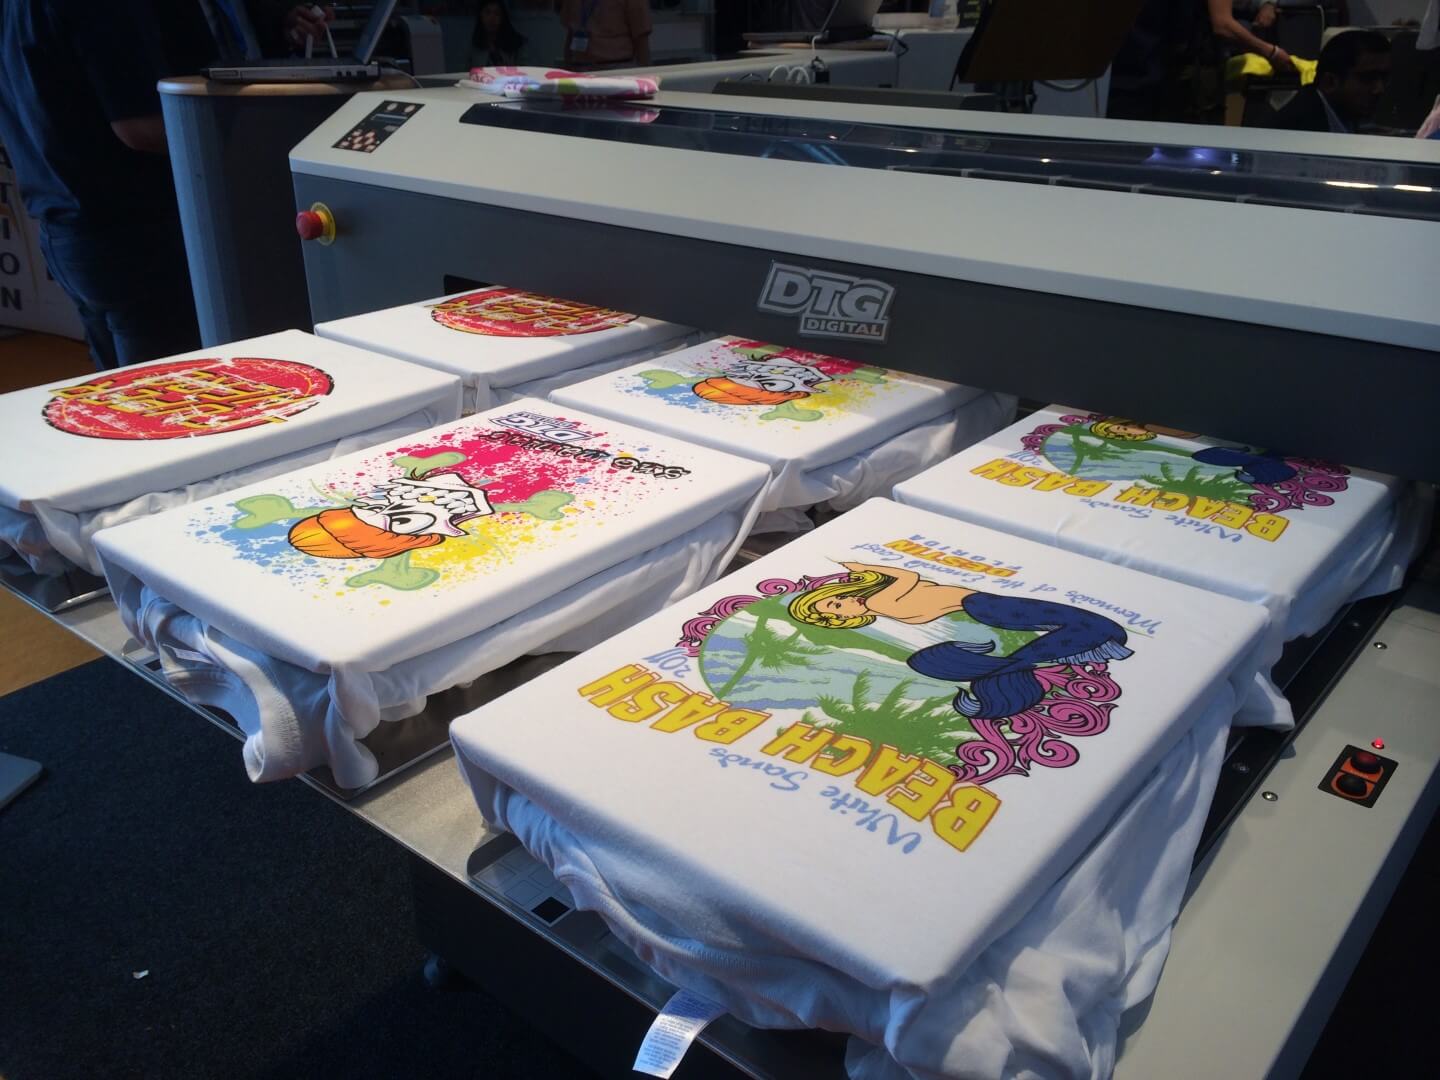 How To Choose The Right T Shirt Printing Company – The Checklist